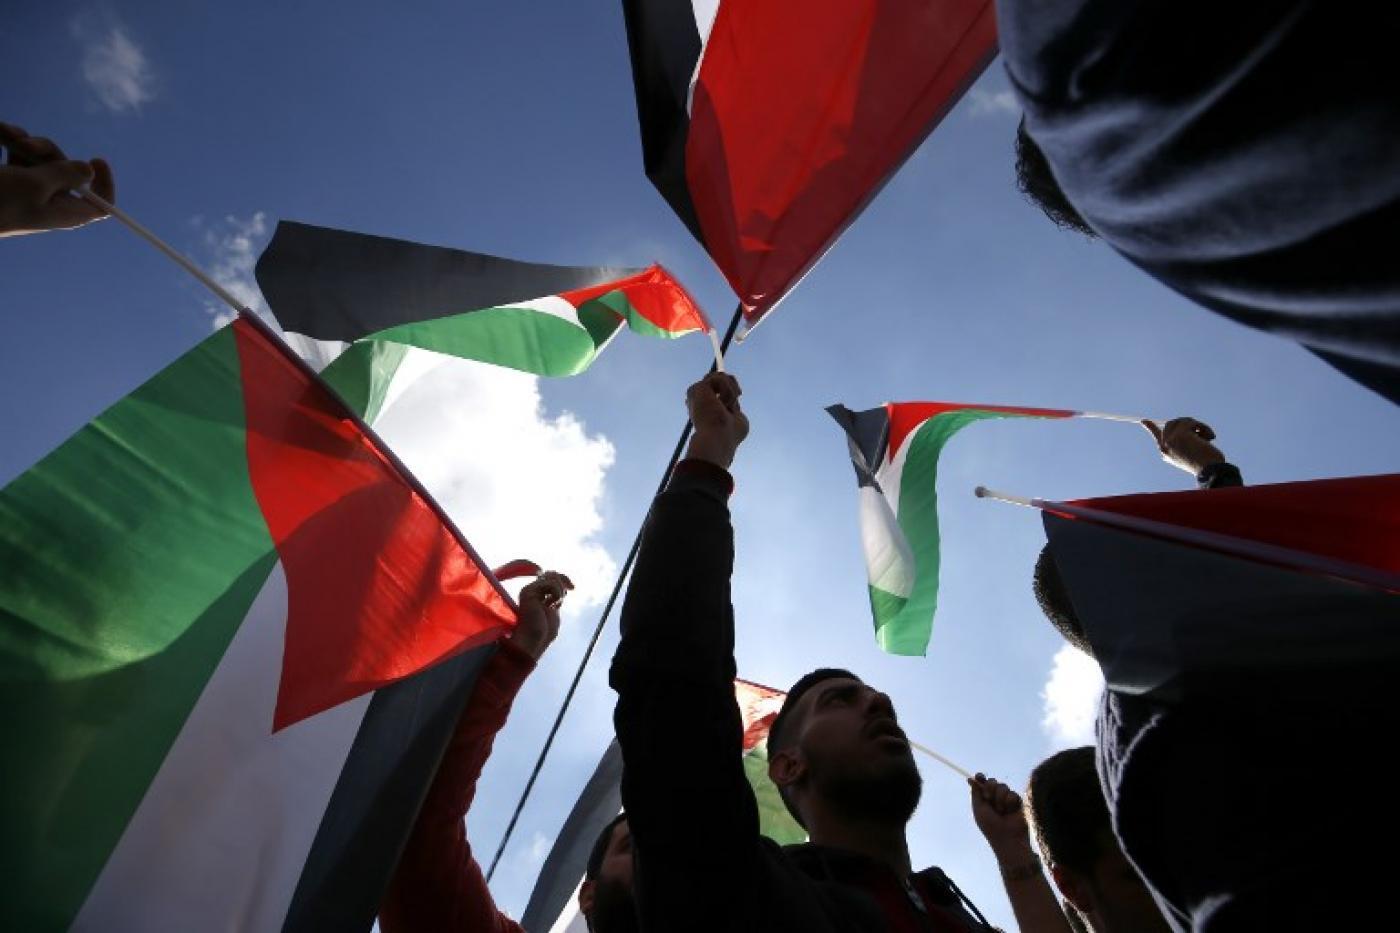 Palestinians wave their national flag in Ramallah in November 2018 (AFP)